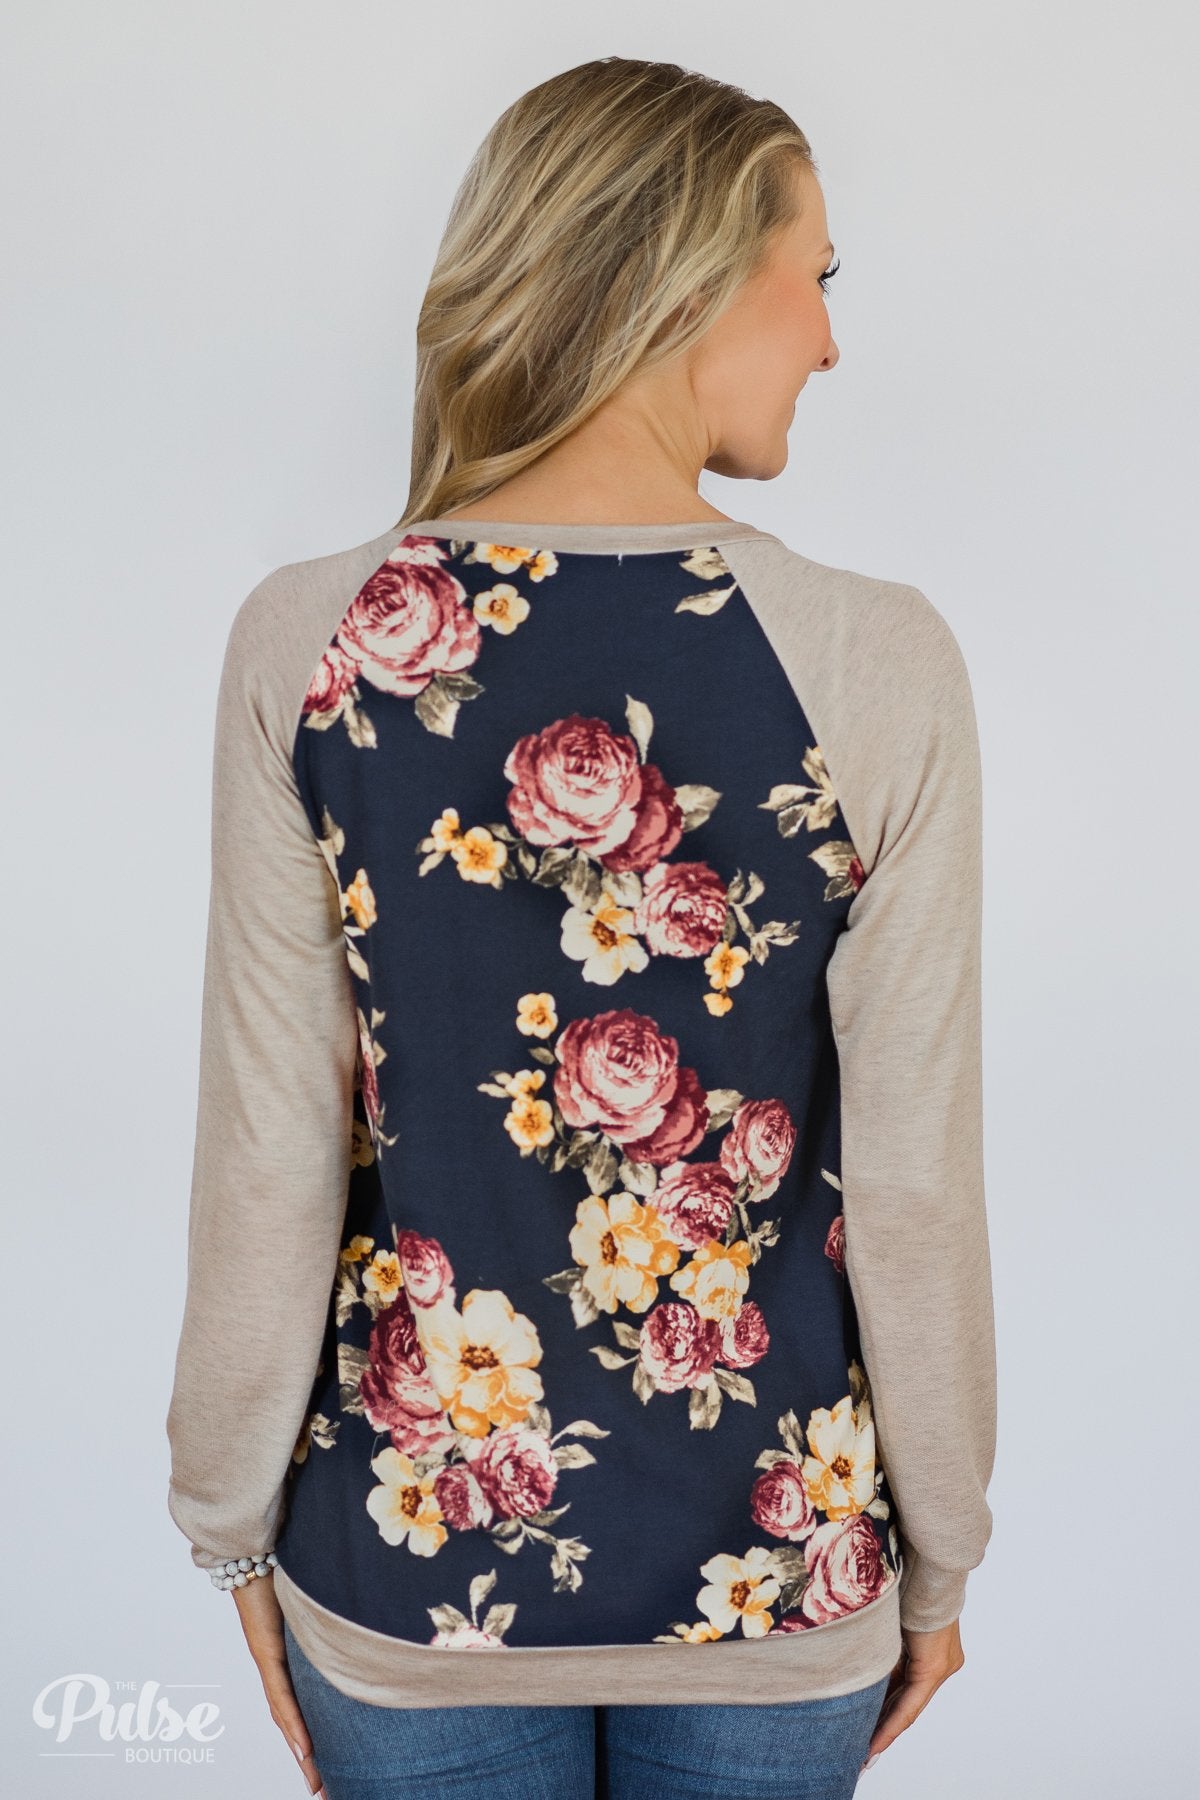 Always Room for Floral Top- Navy & Oatmeal